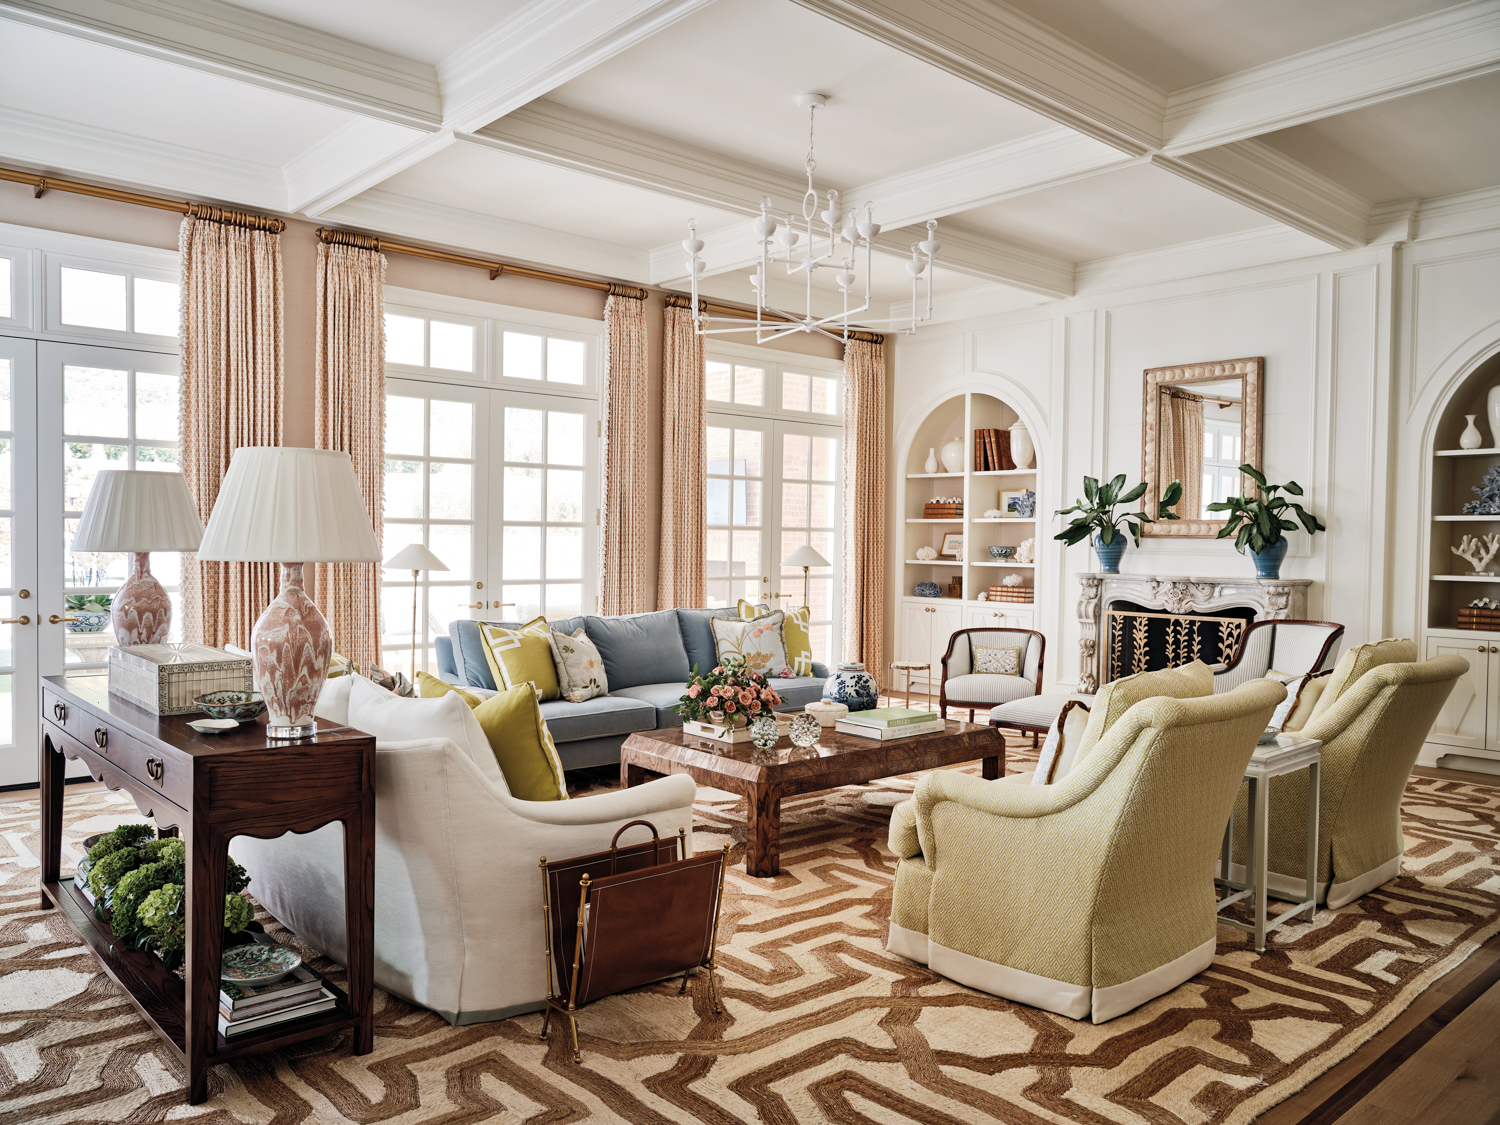 family room with layers of texture found in the millwork, floor covering, furnishings and textiles